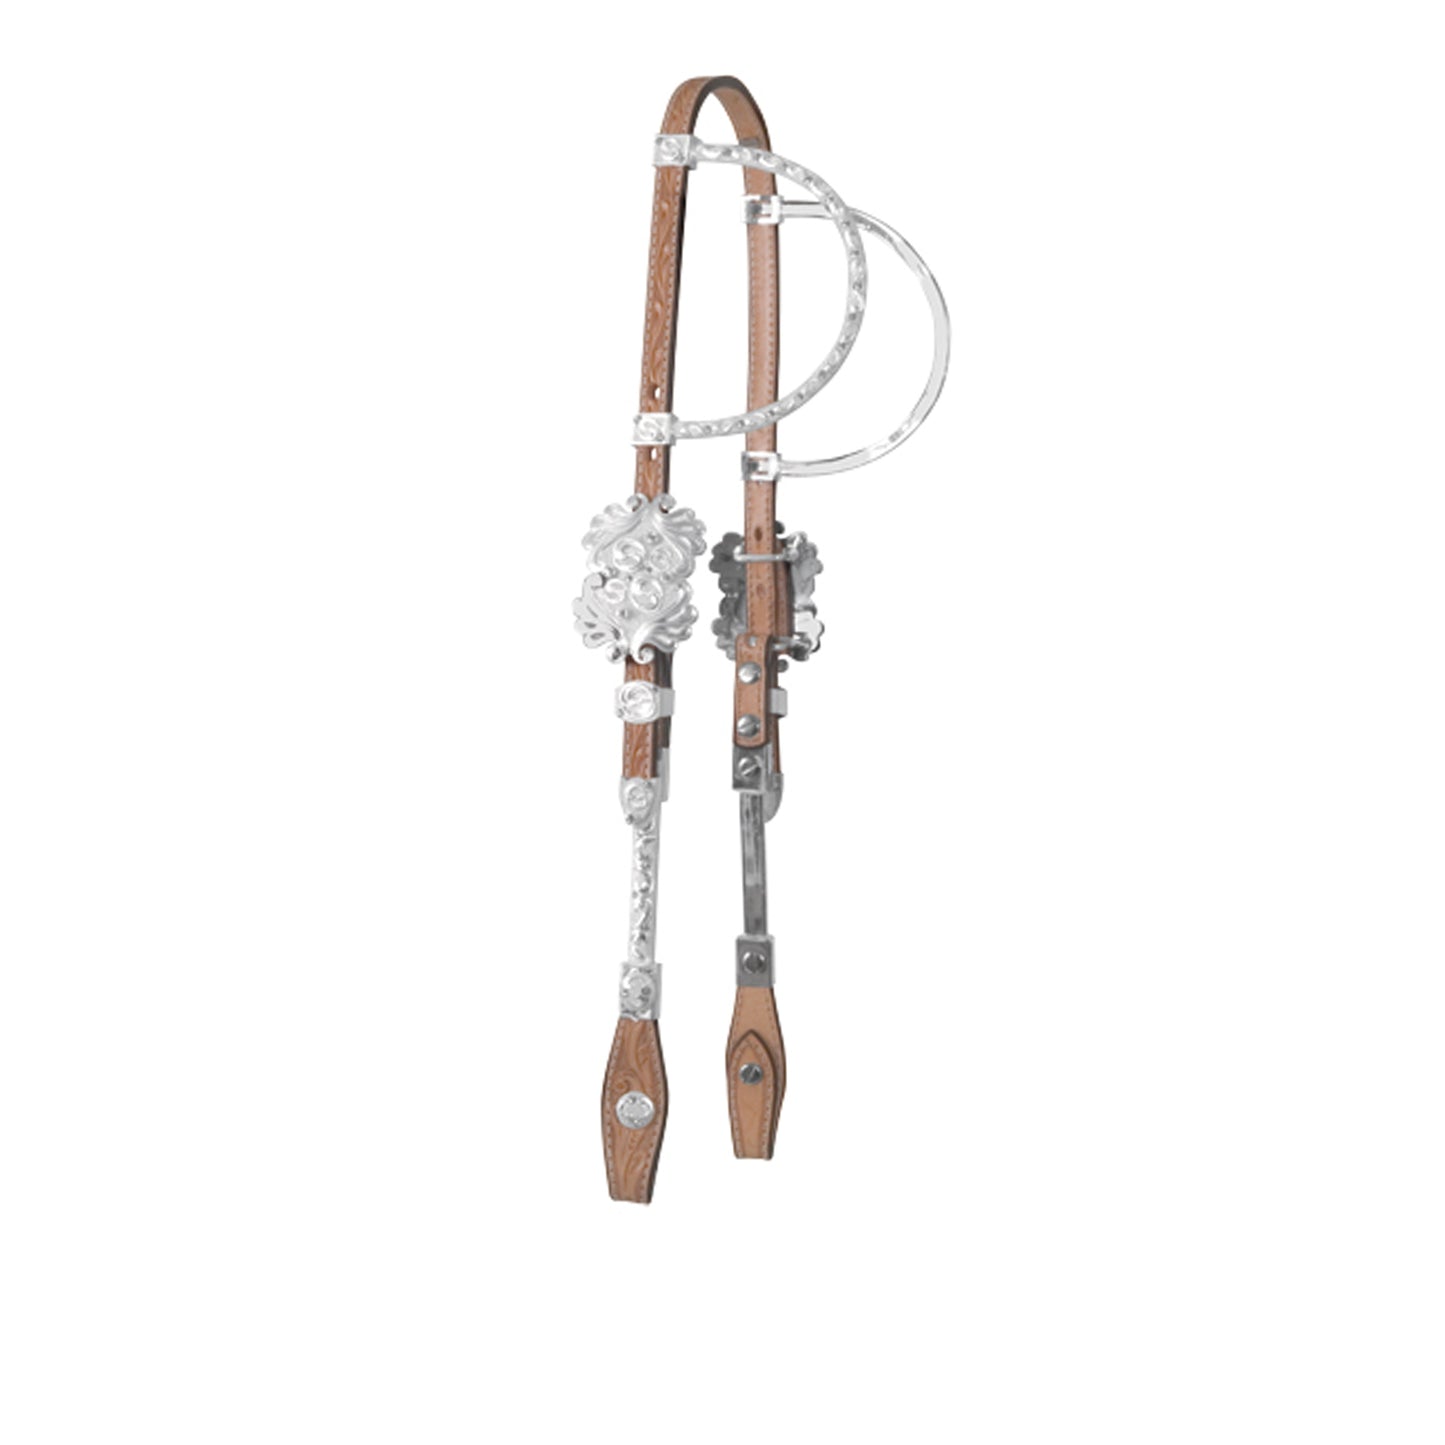 5/8" Flat double silver ear headstall golden leather floral tooled with silver tubular ears, stones, and silver hardware.